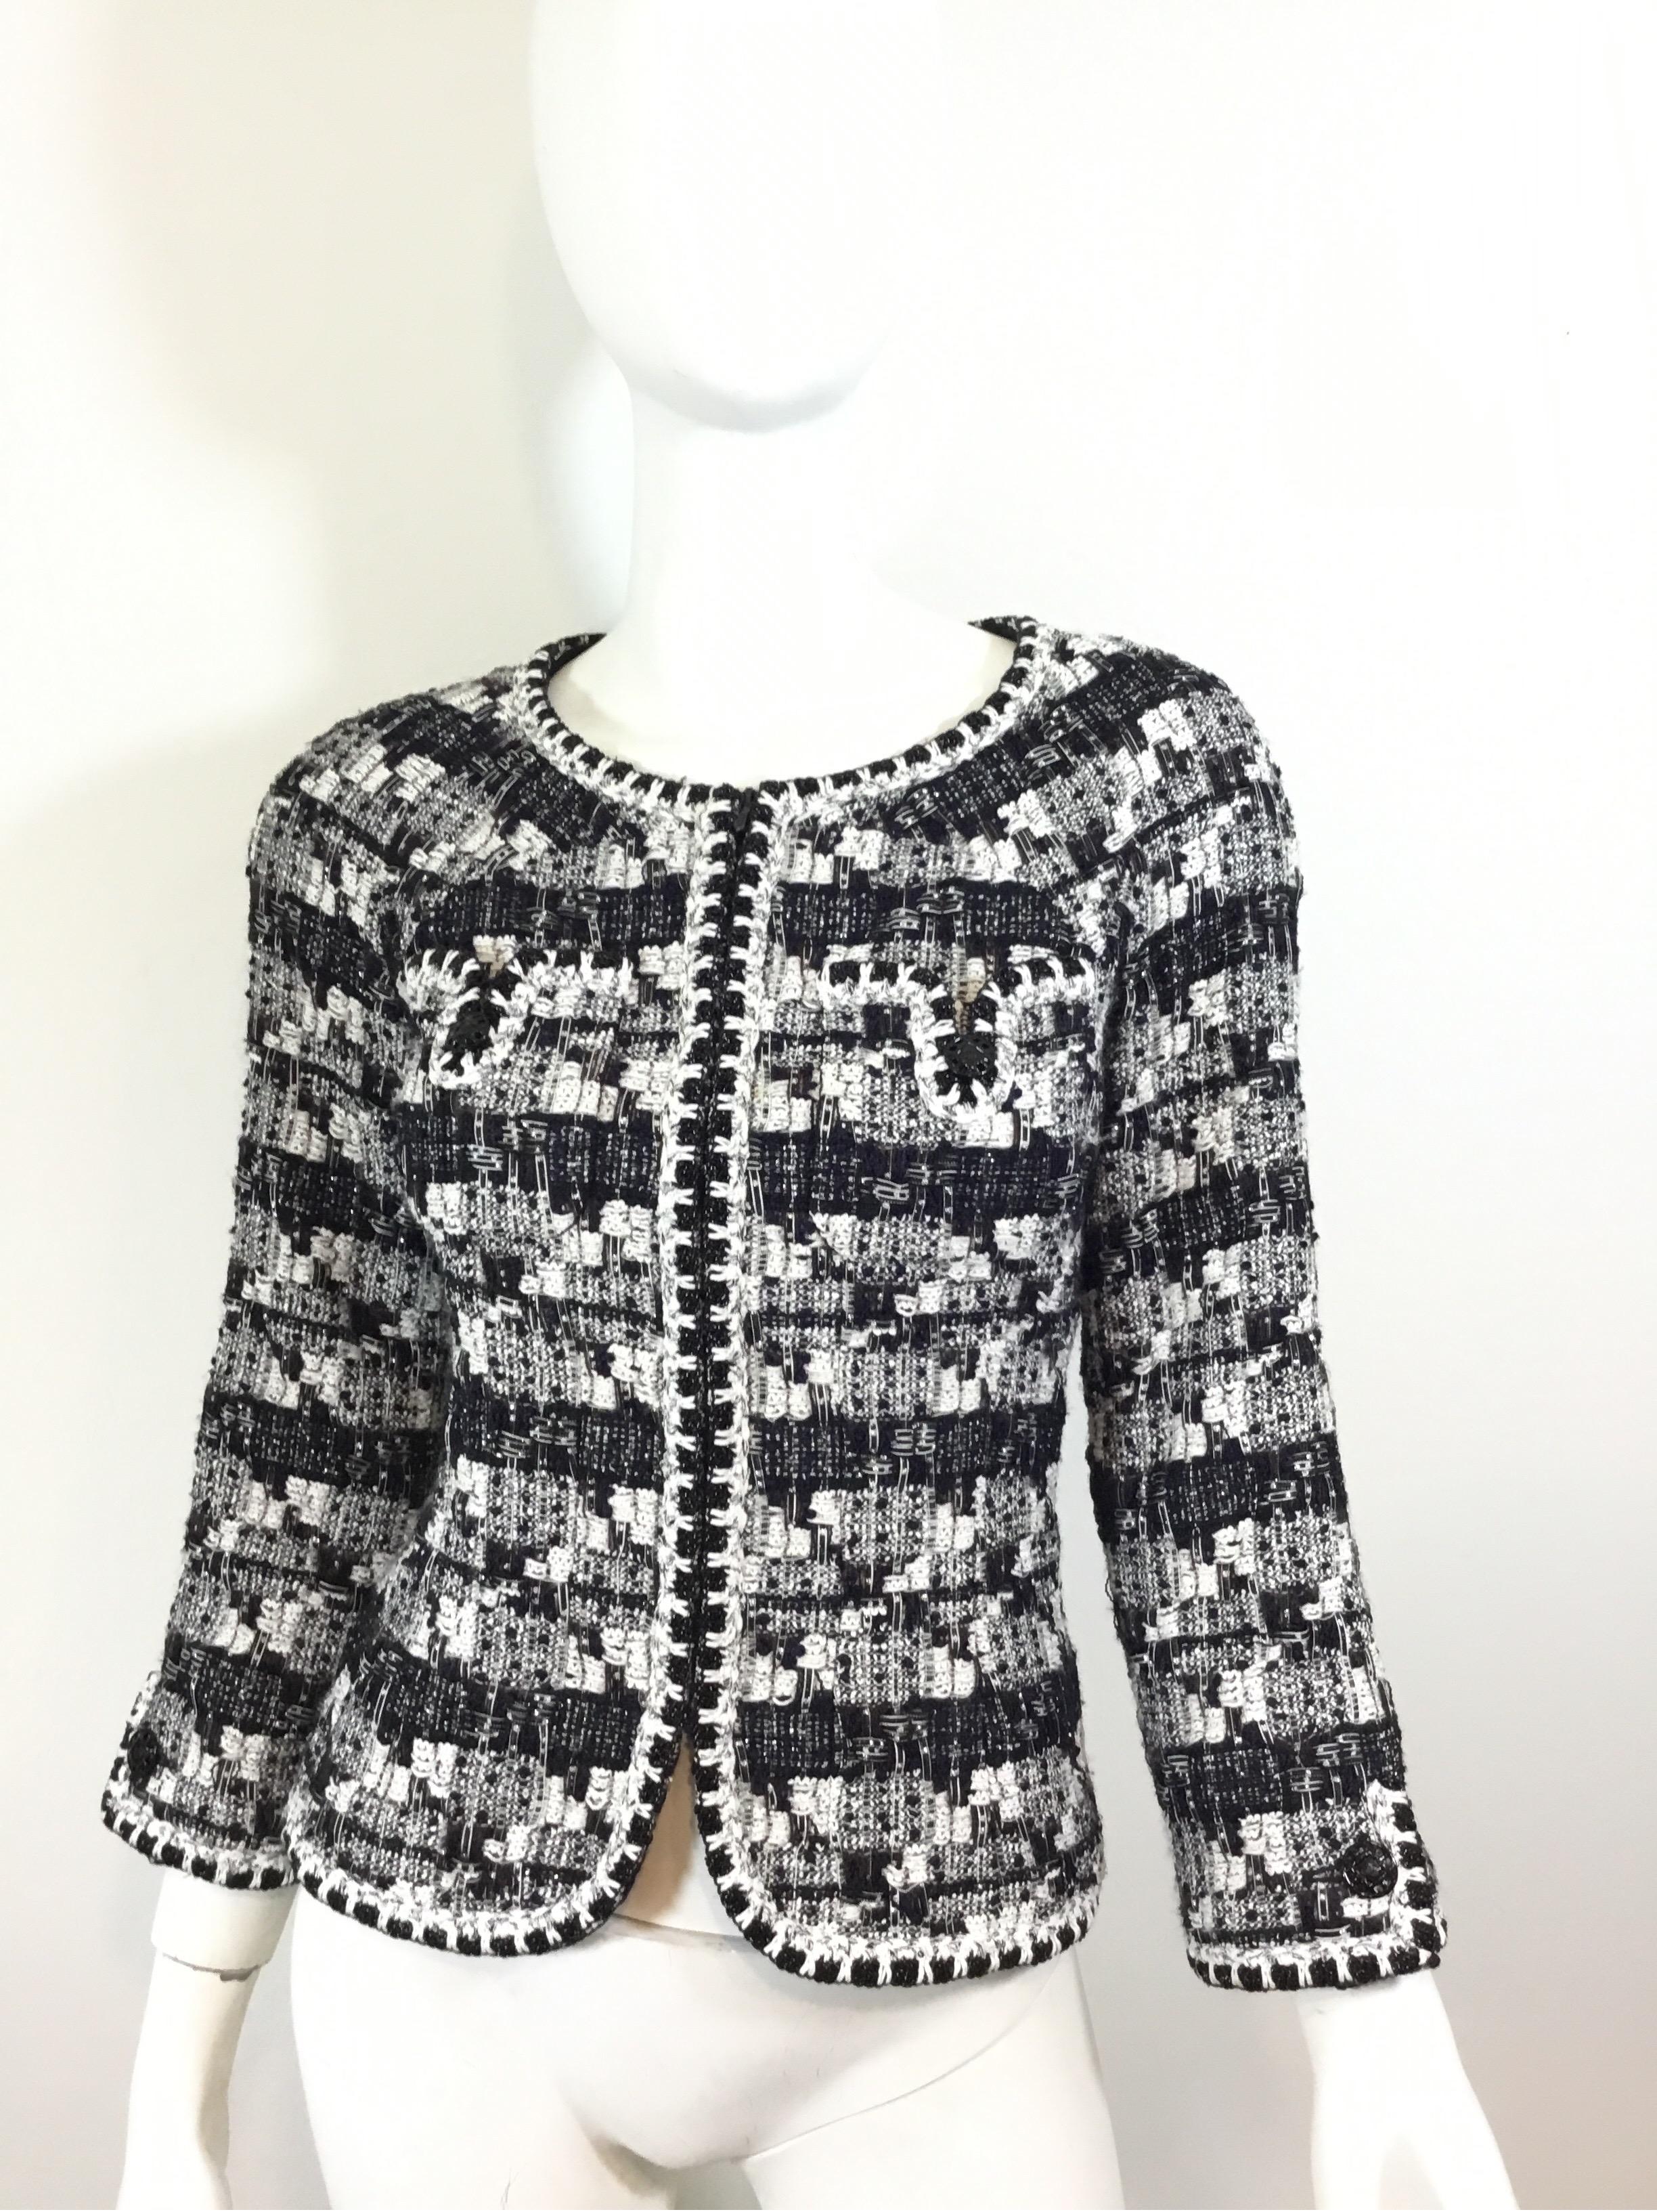 Chanel tweed jacket in black, navy, and white tweed knit throughout, black beading along the trim of the jacket, zipper fastening, full lining with a chain trim along the hem, and two buttoned pockets at the bust. Jacket is a size 36, made in